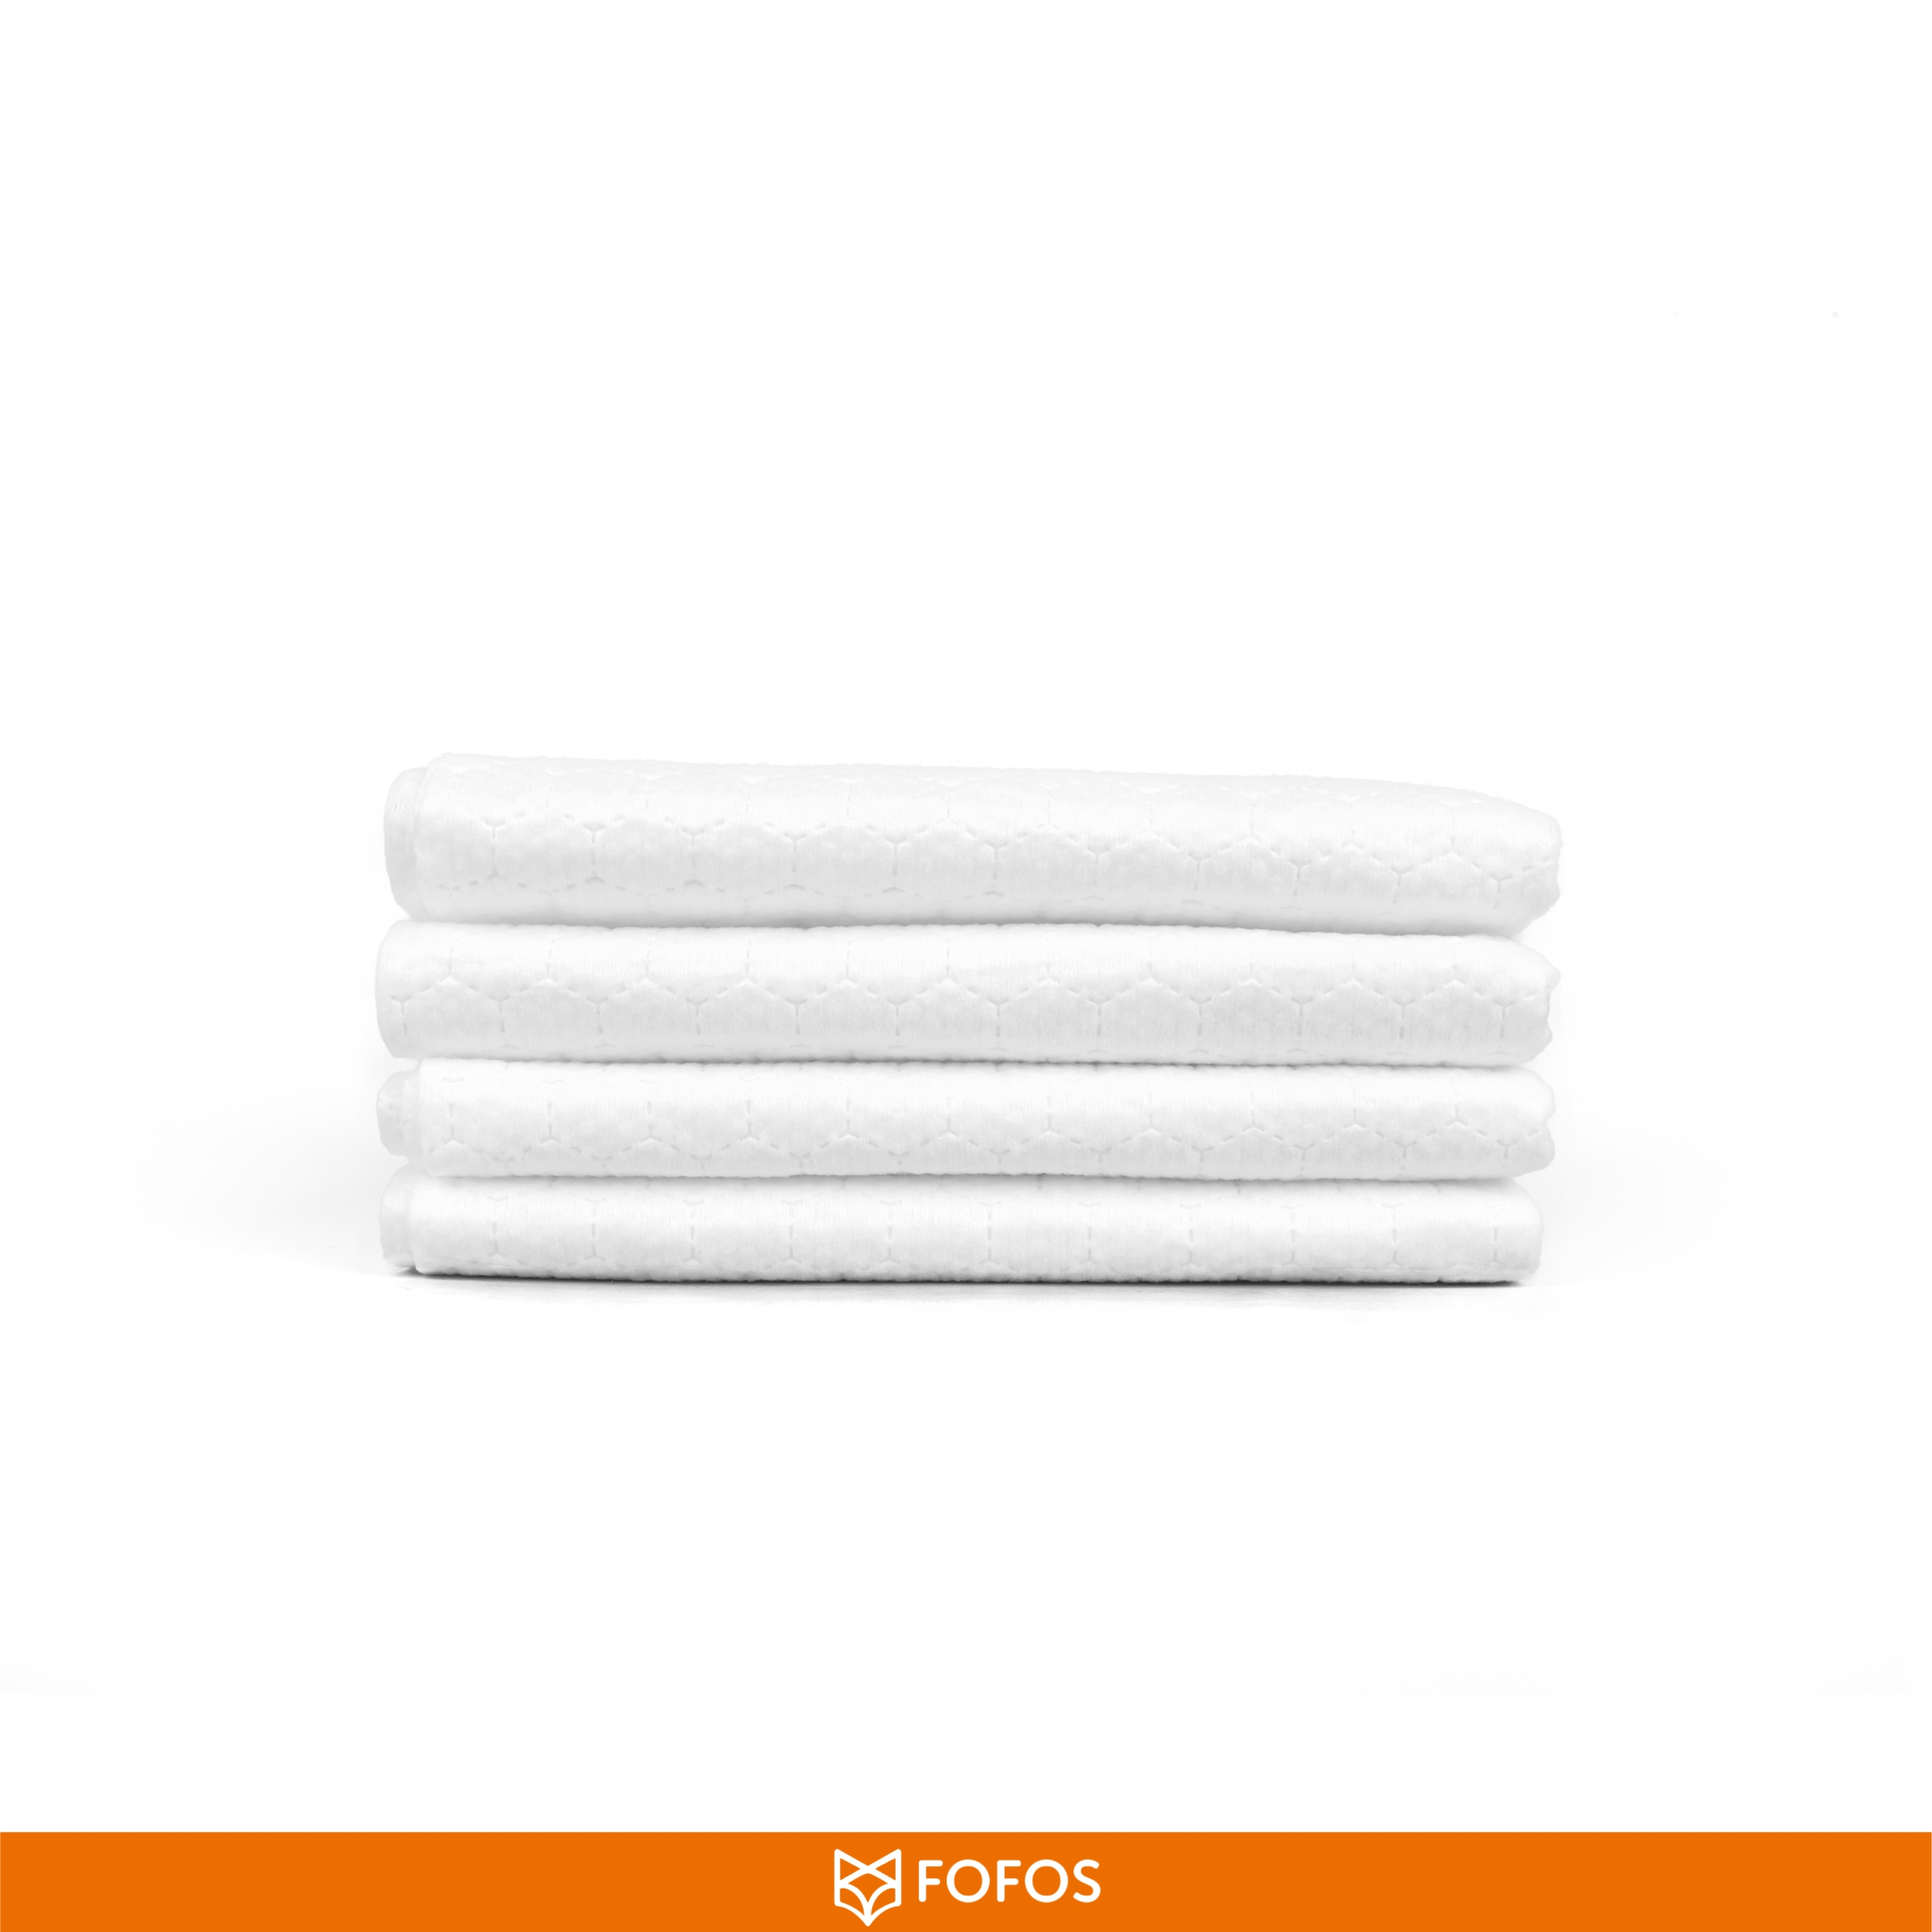 Fofos Disposable Towels for Dogs